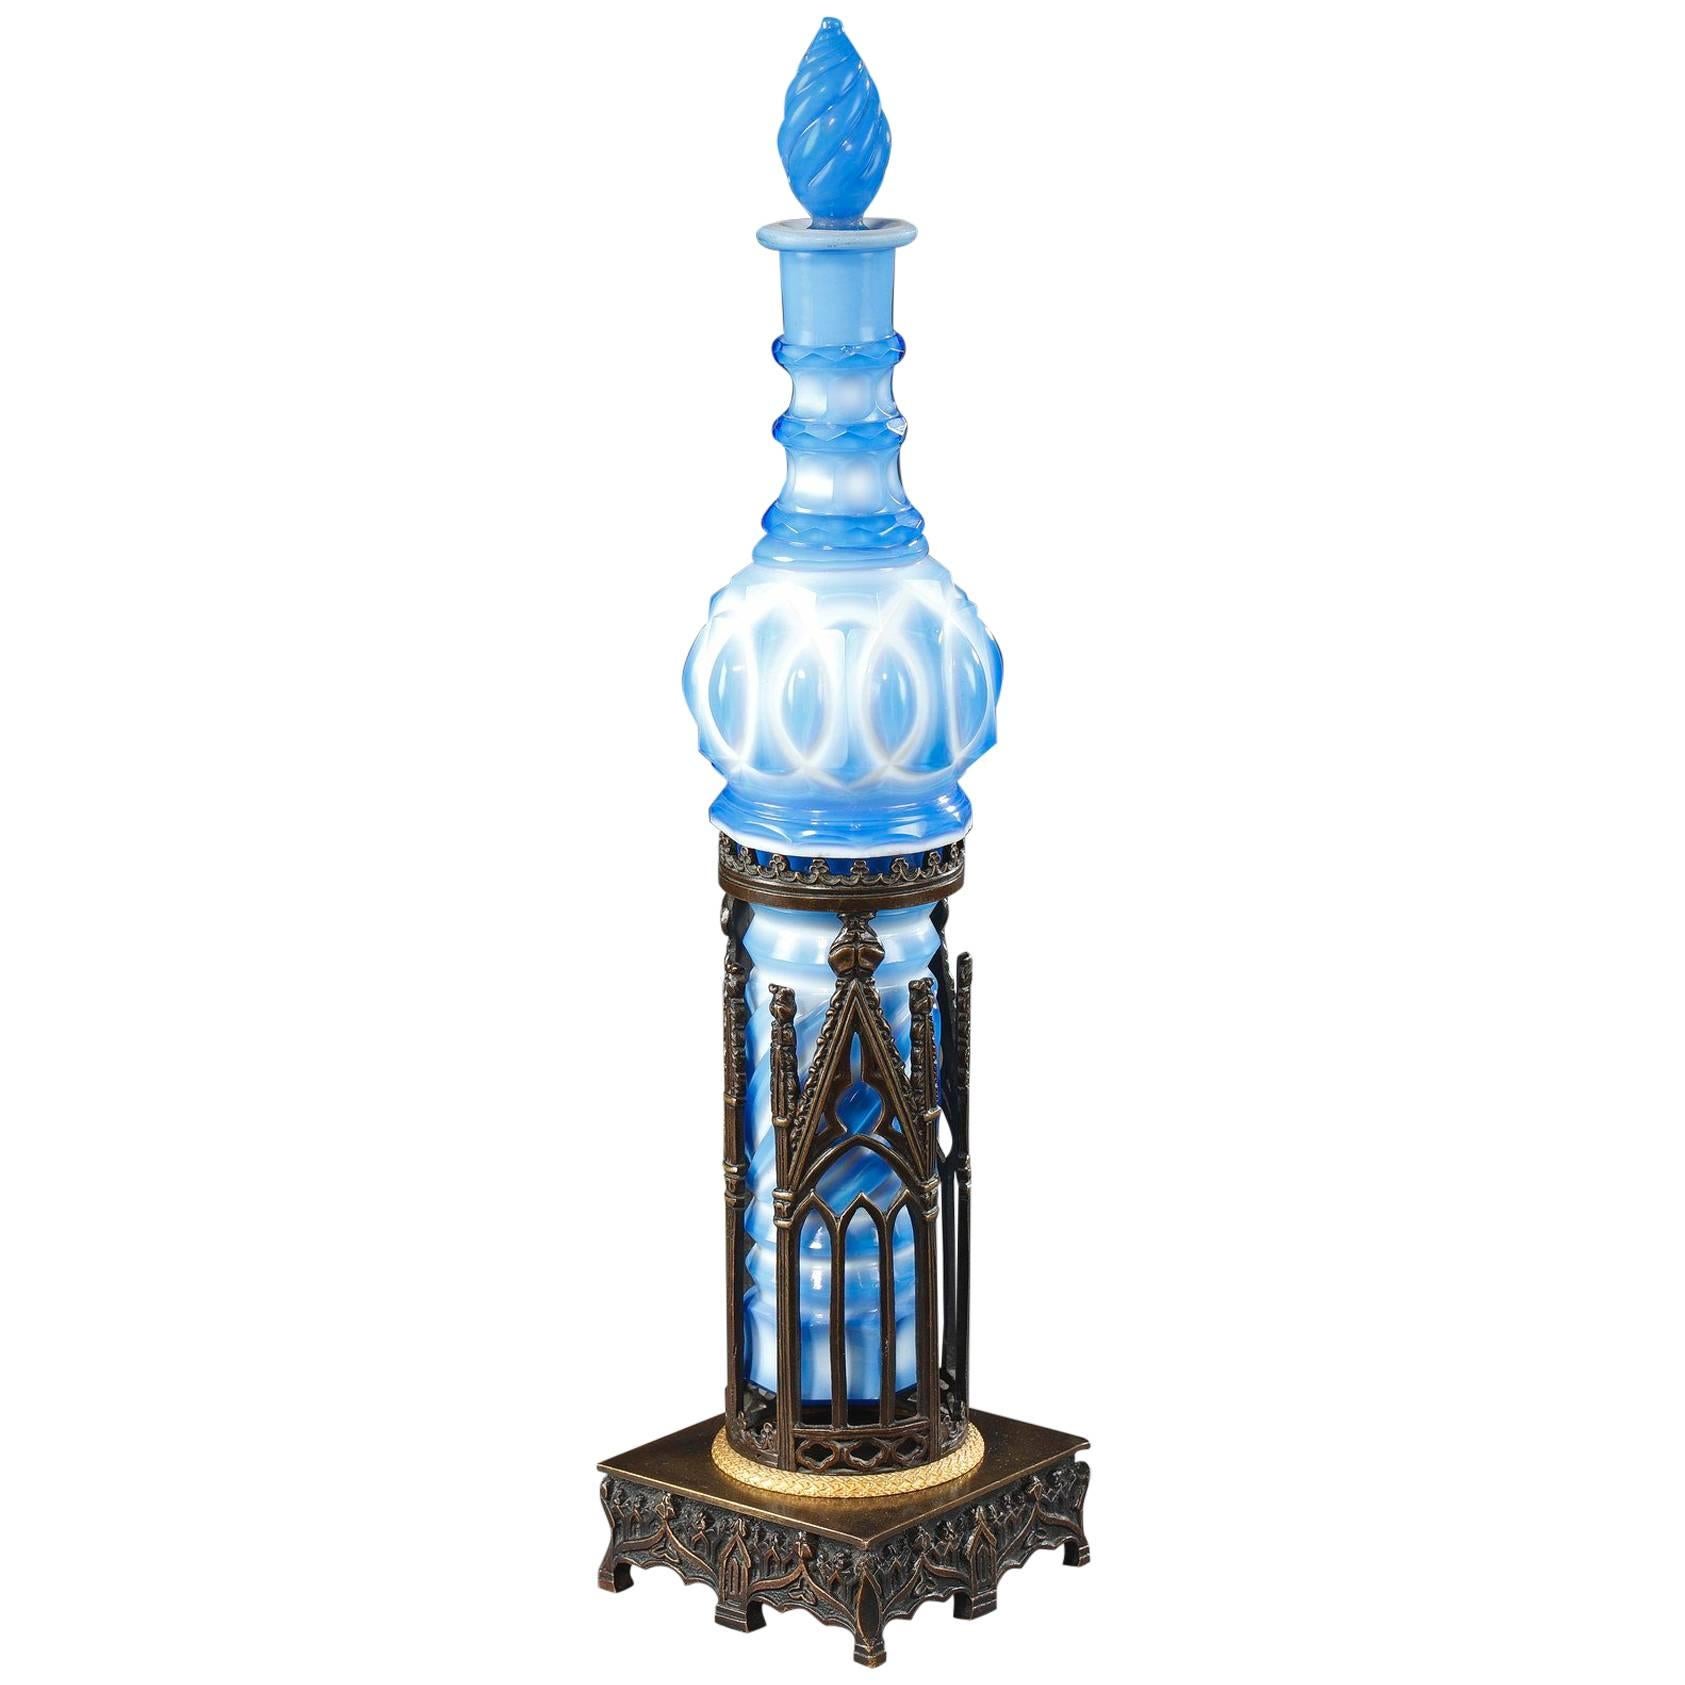 Charles X Carmelite Water Flask with “A La Cathedrale” Decoration